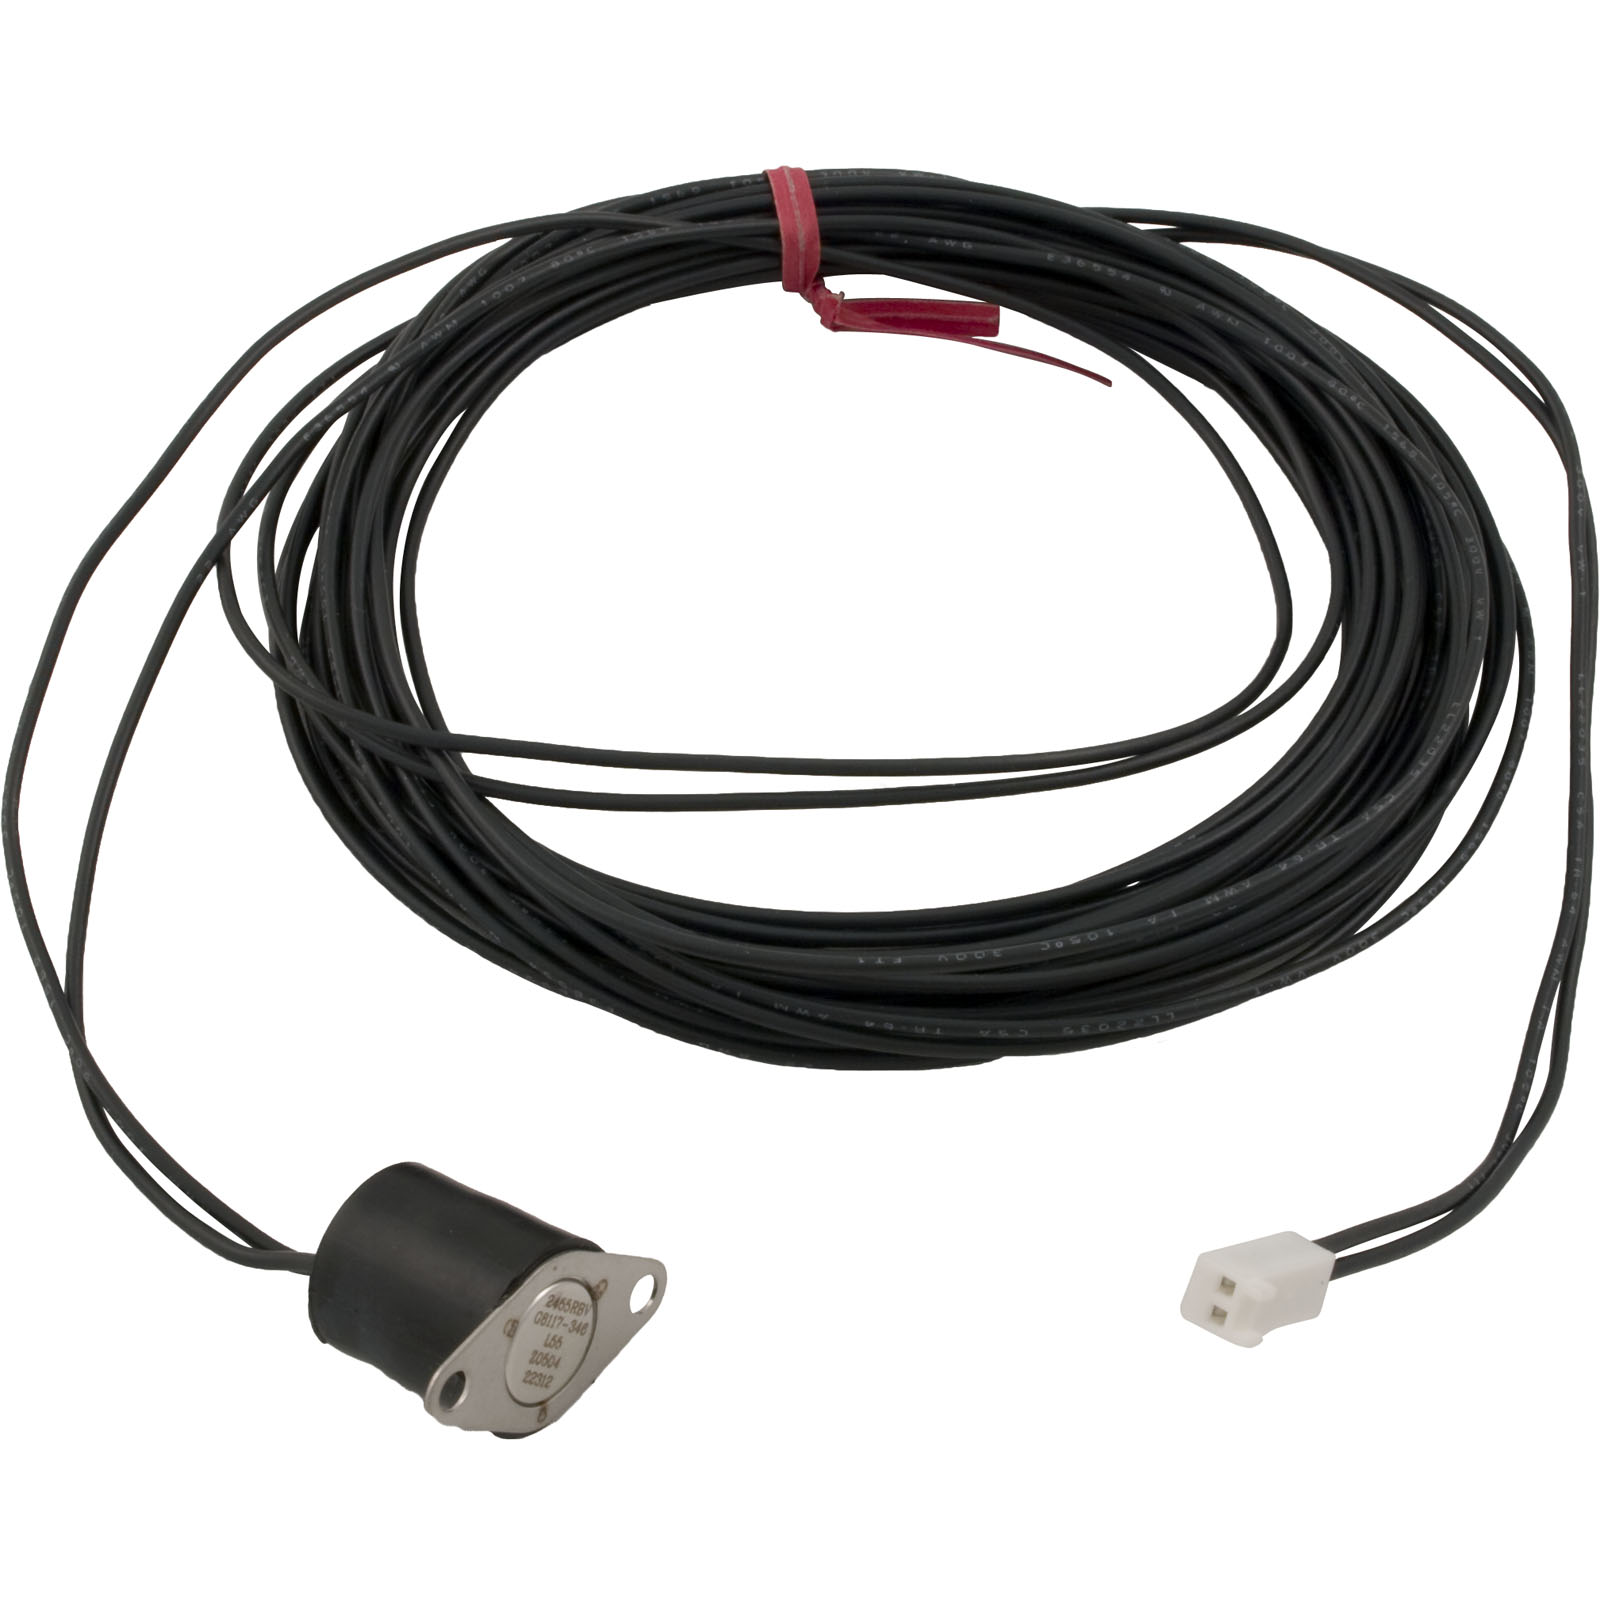 Picture of Freeze Control, Balboa, External, 15 foot Cord